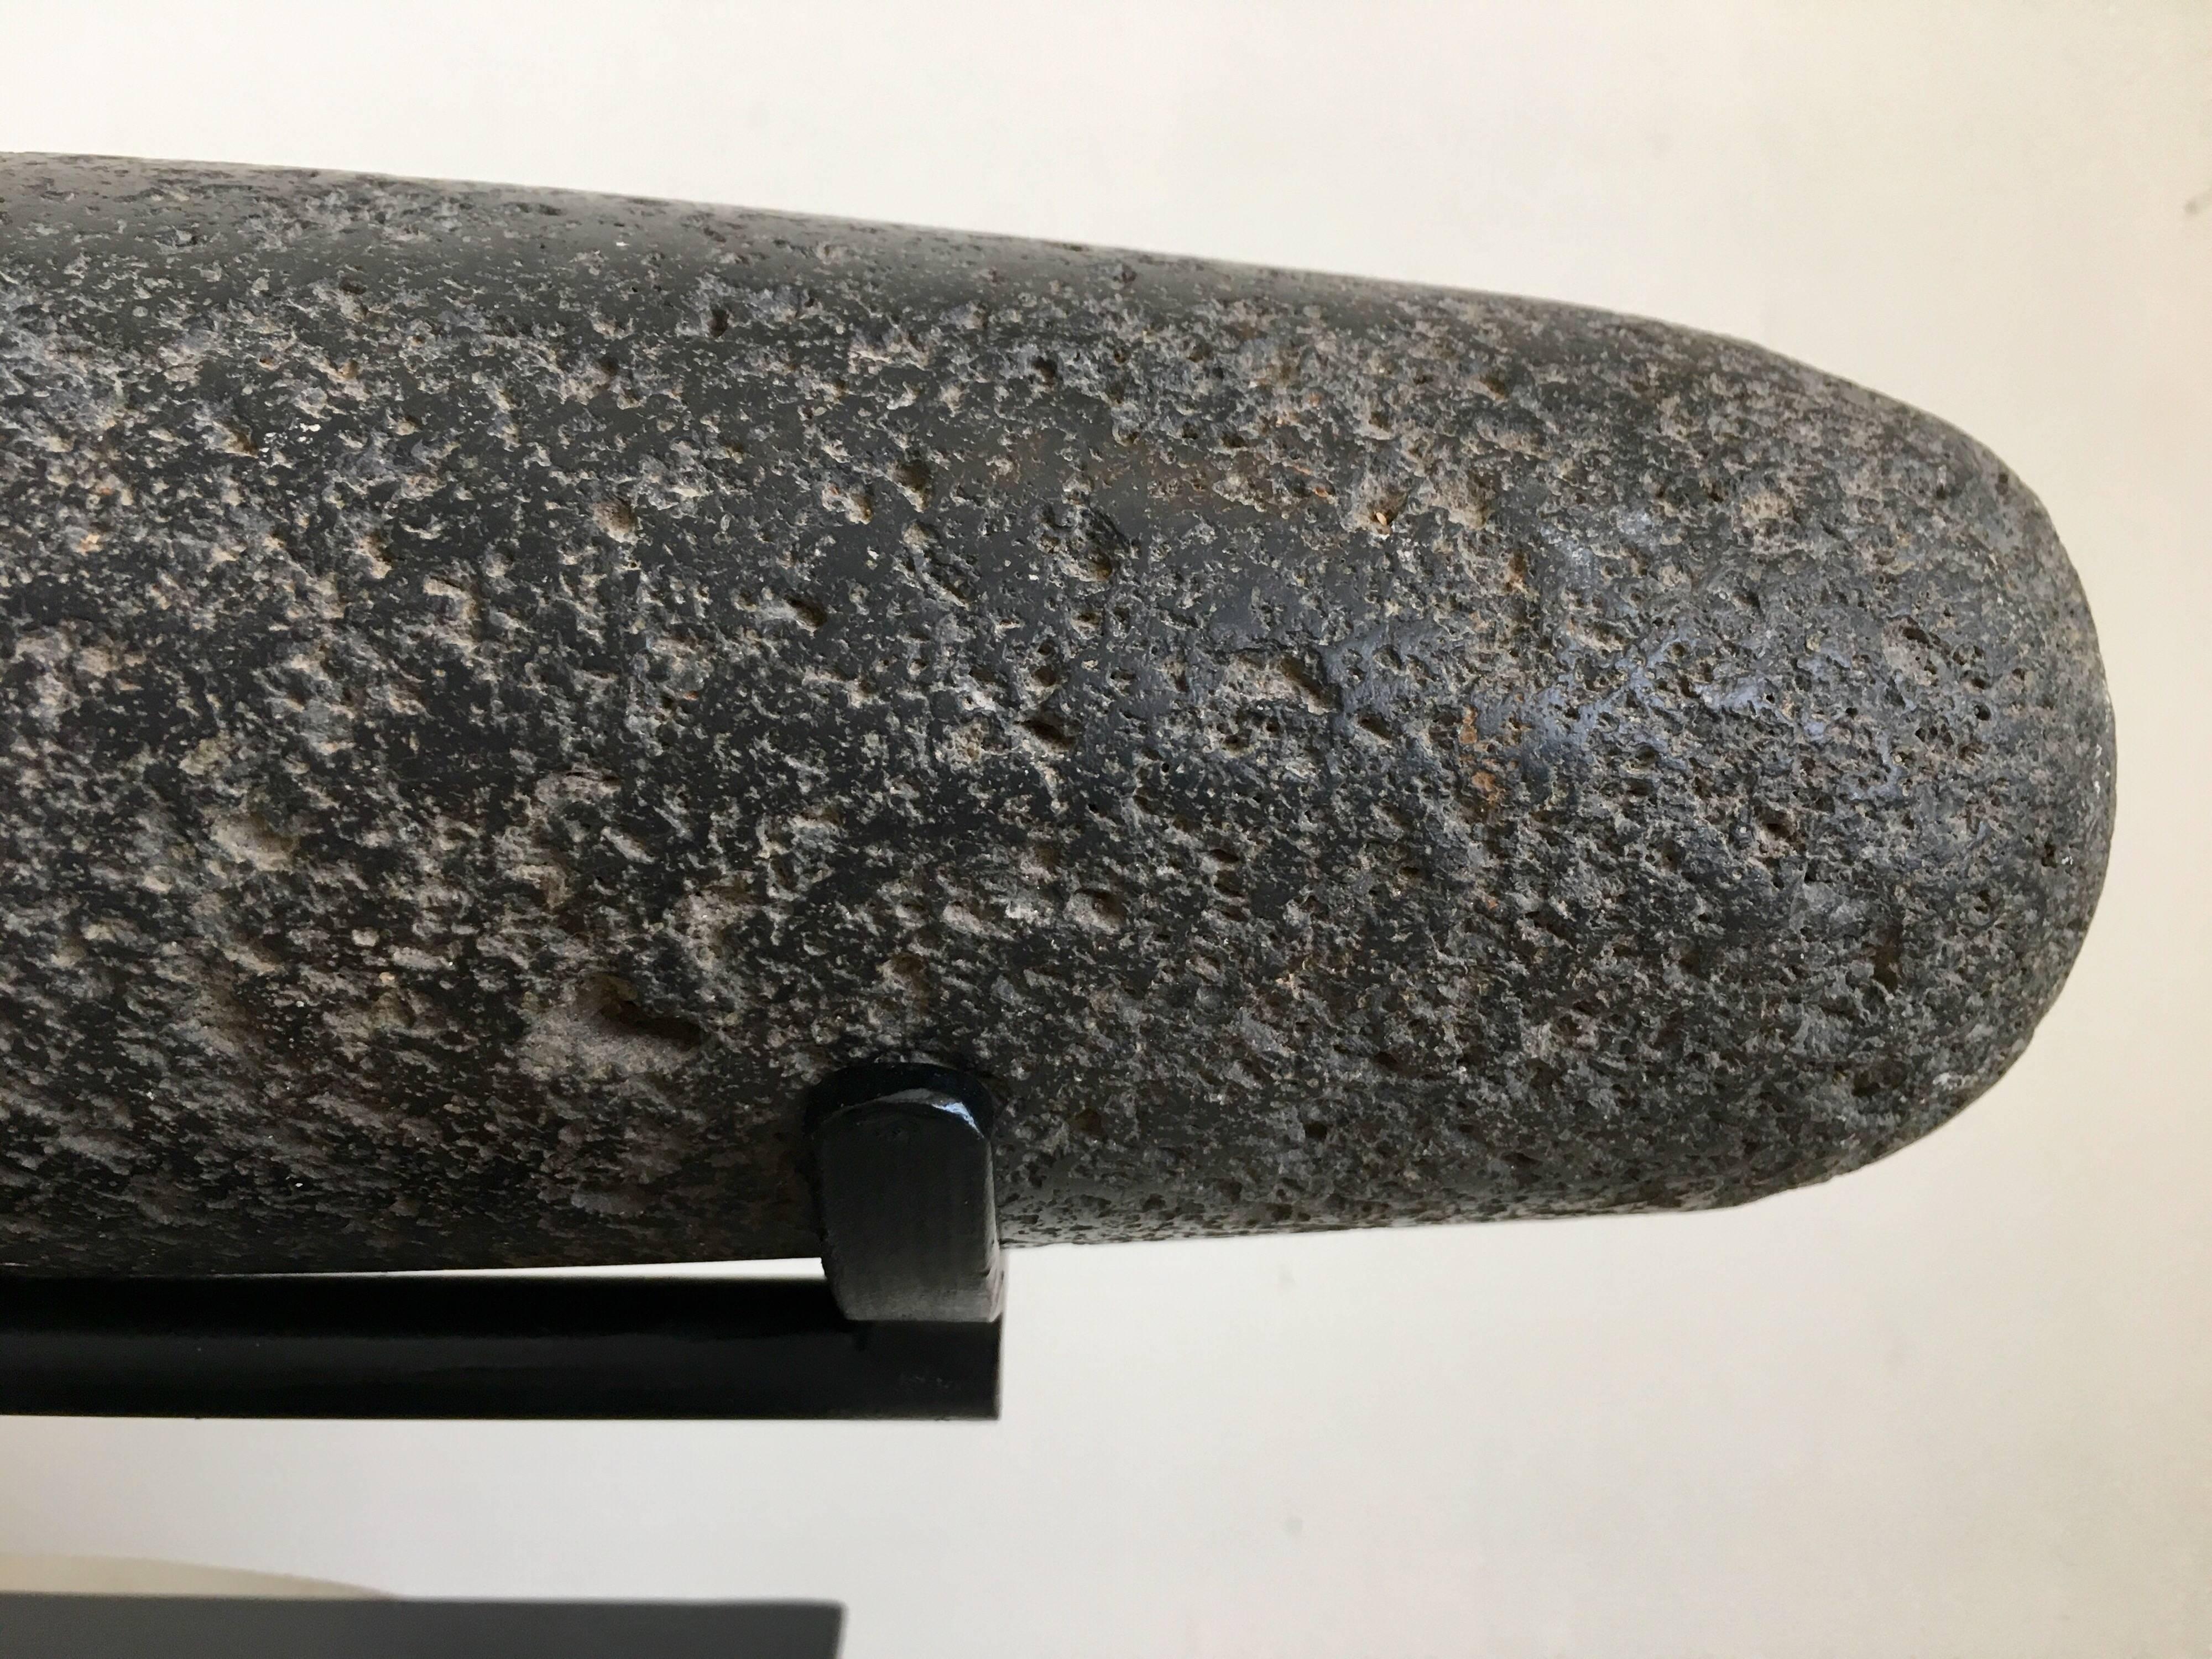 Primitive 18th Century Volcanic Pestle from Mexico